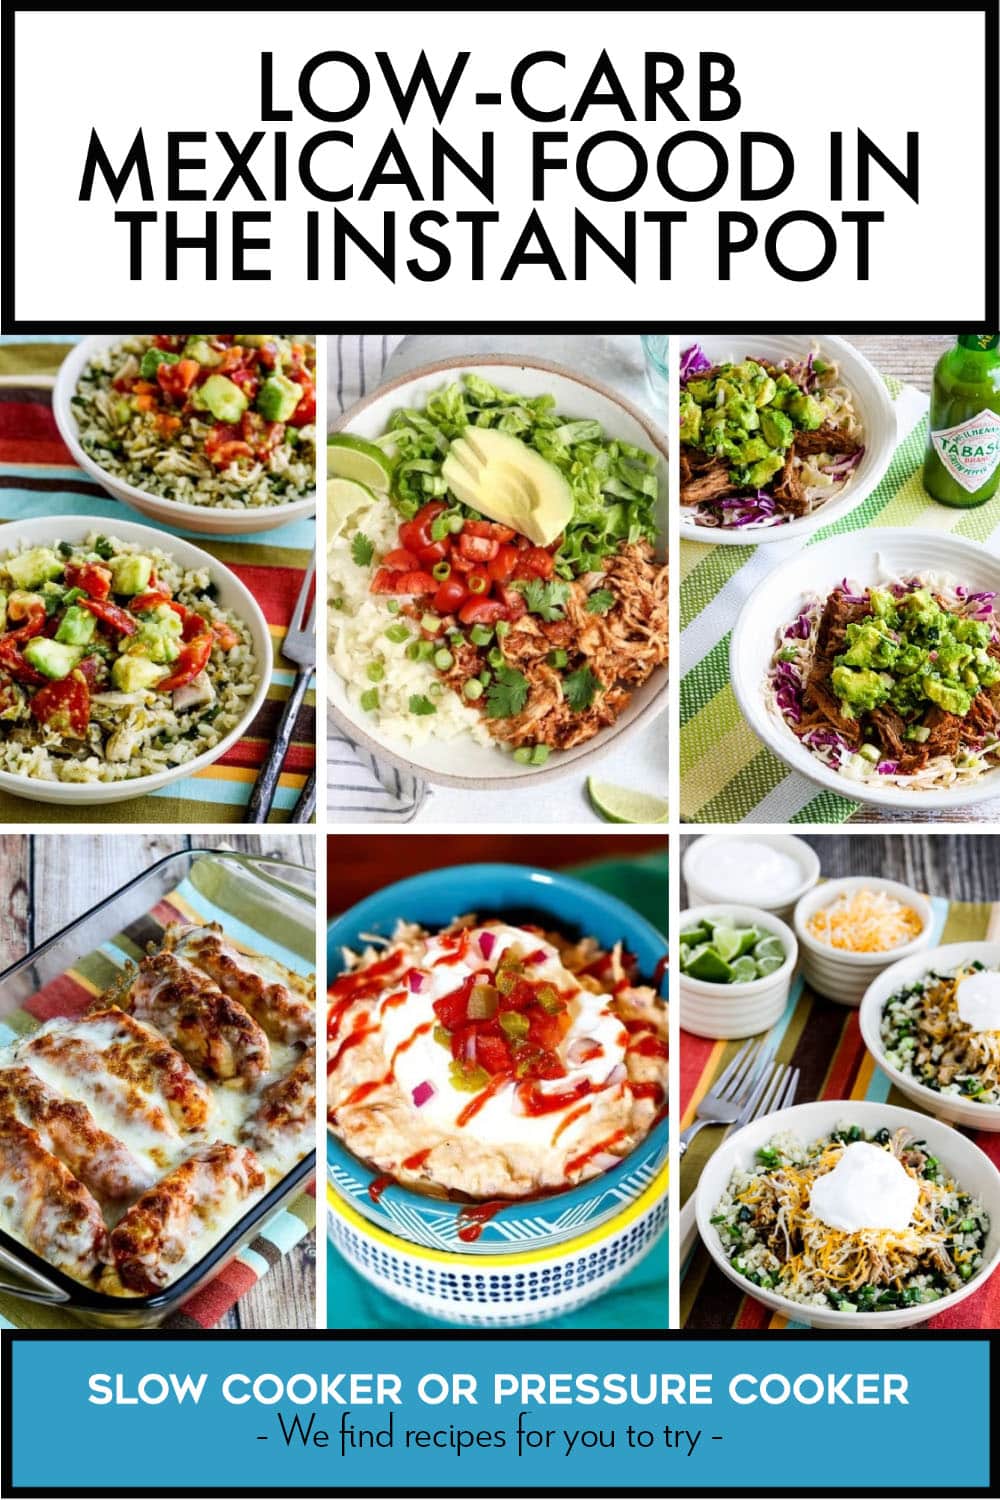 Pinterest image of Low-Carb Mexican Food in the Instant Pot